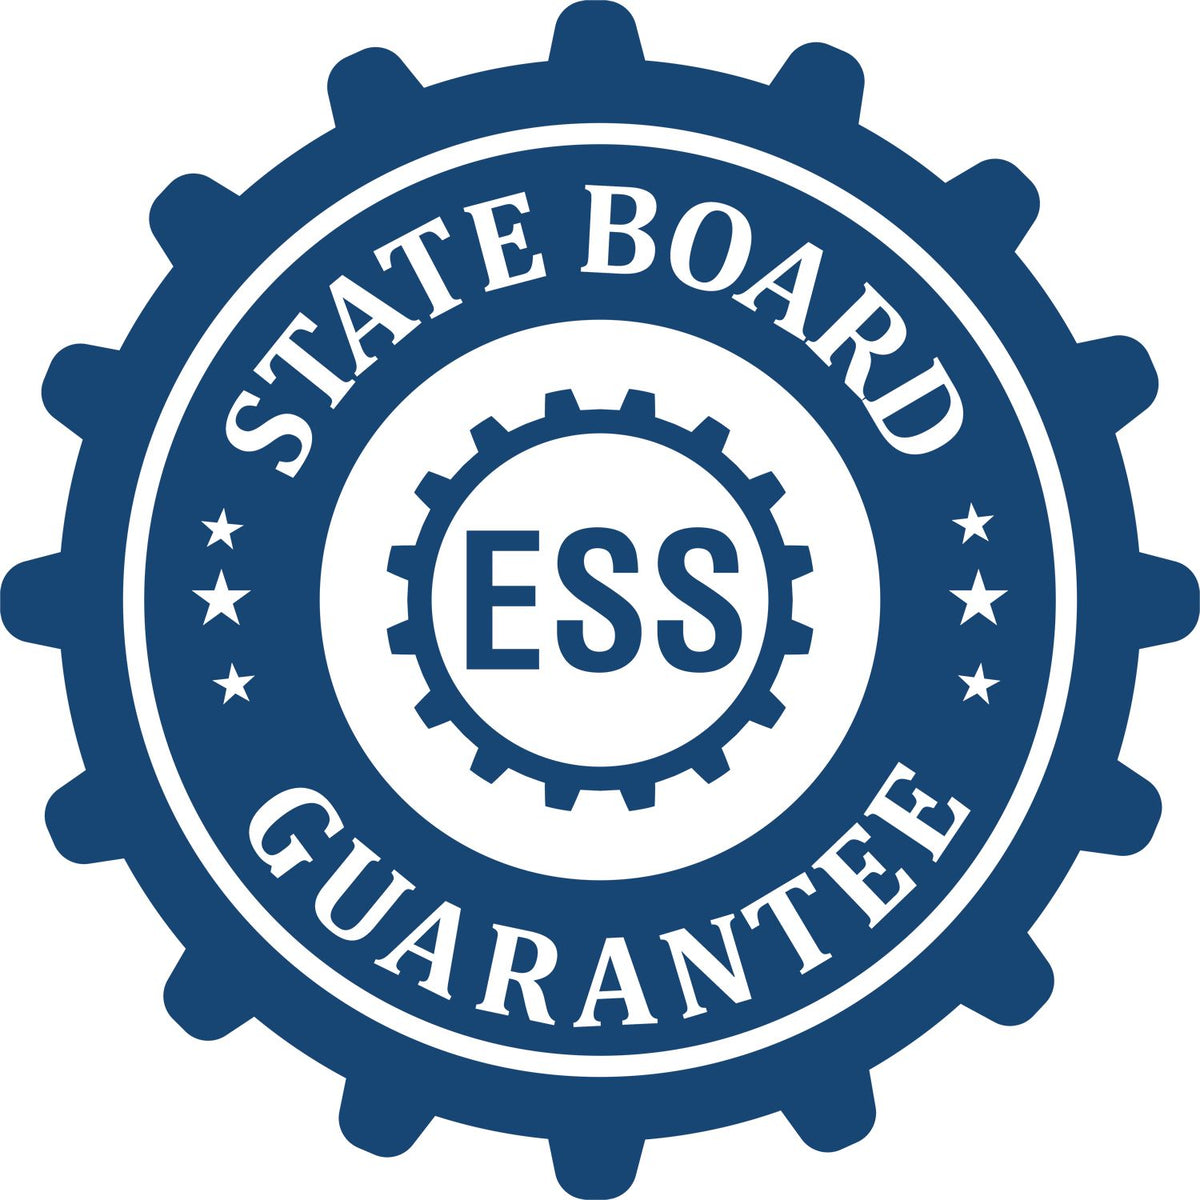 An emblem in a gear shape illustrating a state board guarantee for the Hybrid New Jersey Landscape Architect Seal